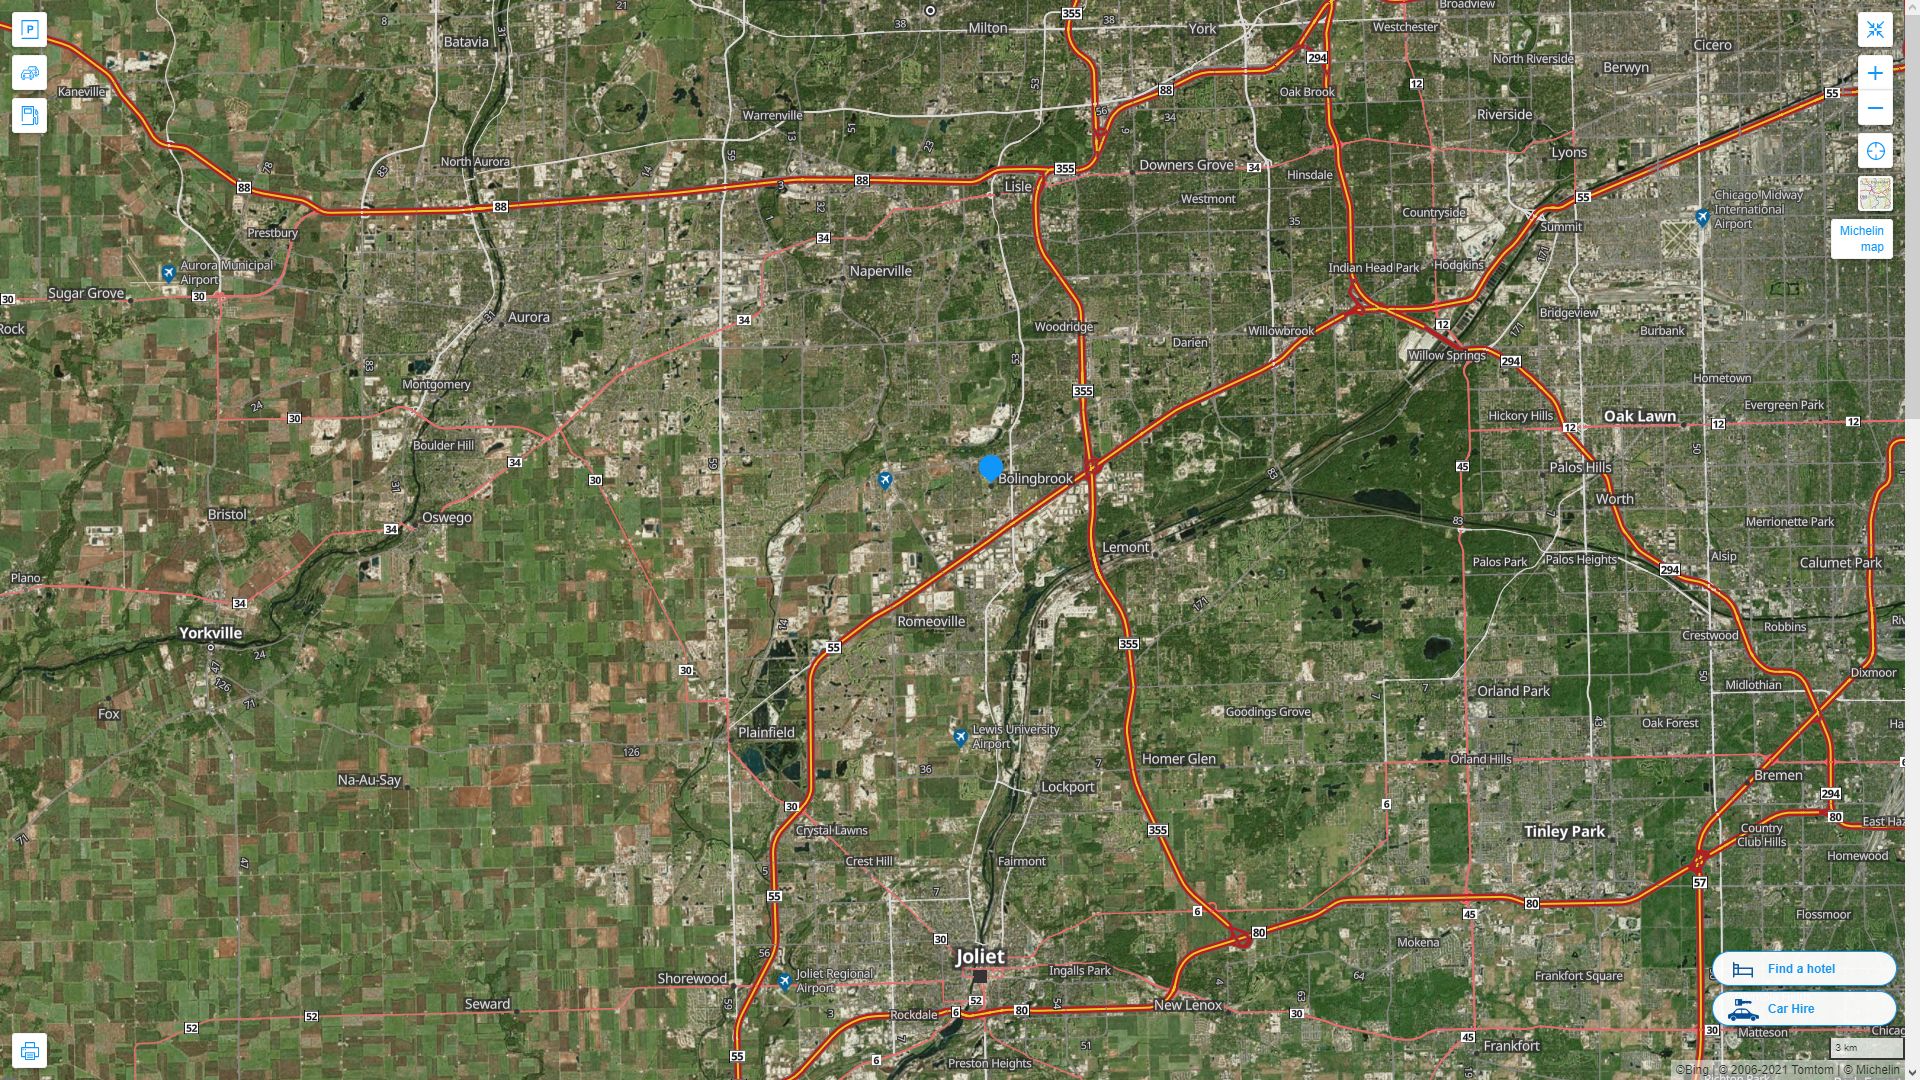 Bolingbrook illinois Highway and Road Map with Satellite View